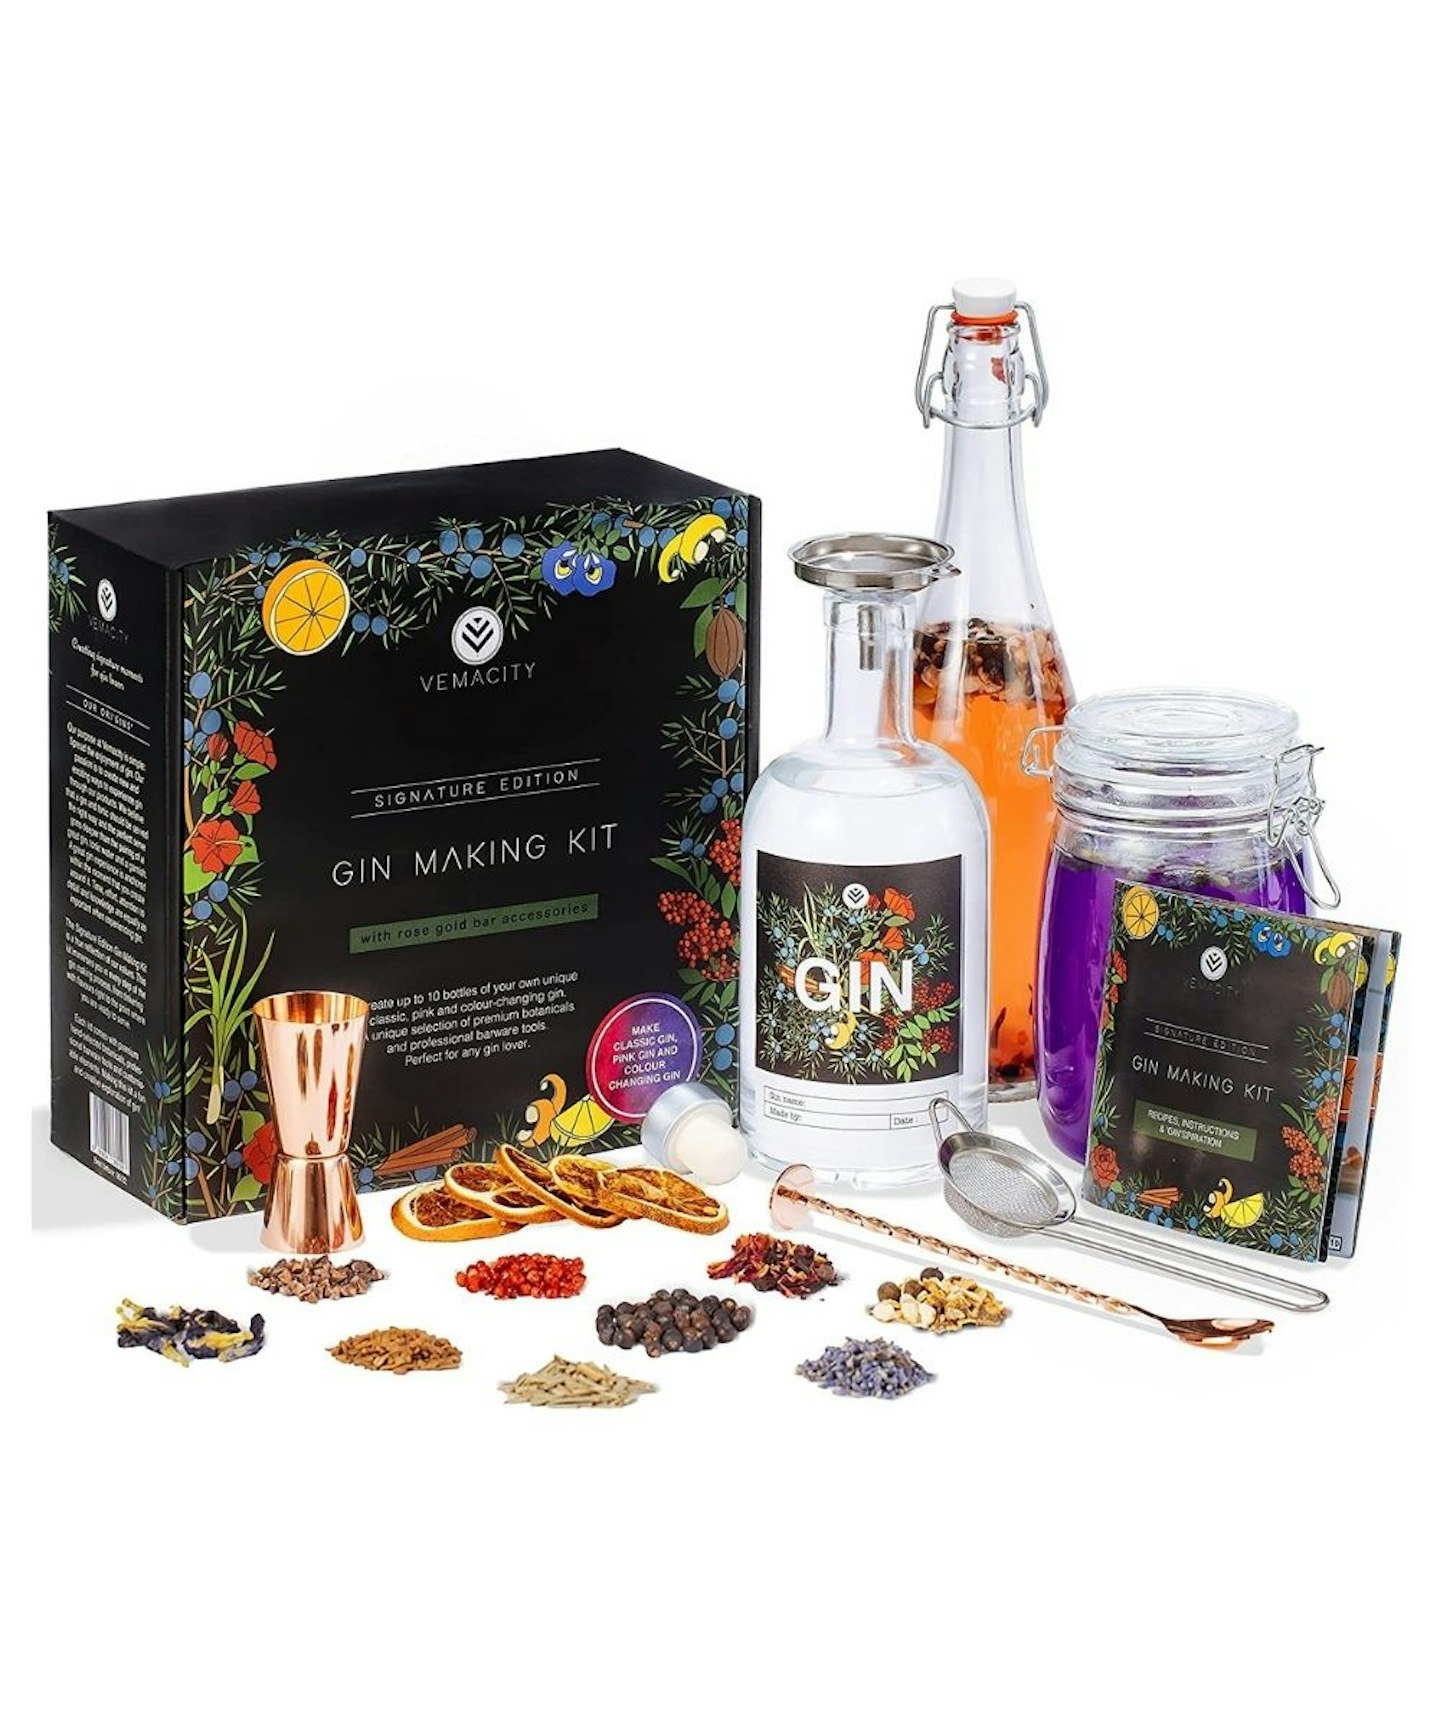 The Signature Edition Gin Making Kit